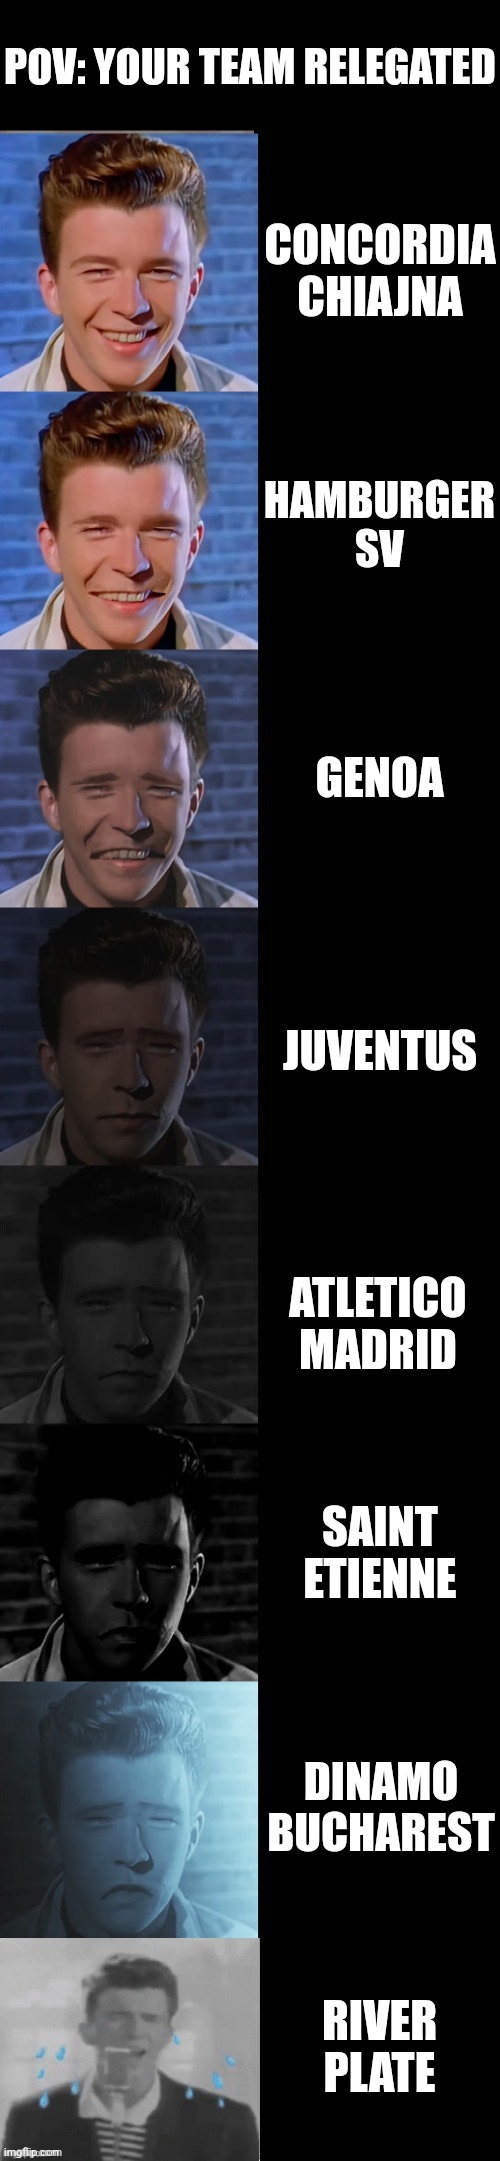 POV: Your team relegated | POV: YOUR TEAM RELEGATED; CONCORDIA CHIAJNA; HAMBURGER SV; GENOA; JUVENTUS; ATLETICO MADRID; SAINT ETIENNE; DINAMO BUCHAREST; RIVER PLATE | image tagged in rick astley becoming sad true form,relegated,river plate,dinamo,juventus,sports | made w/ Imgflip meme maker